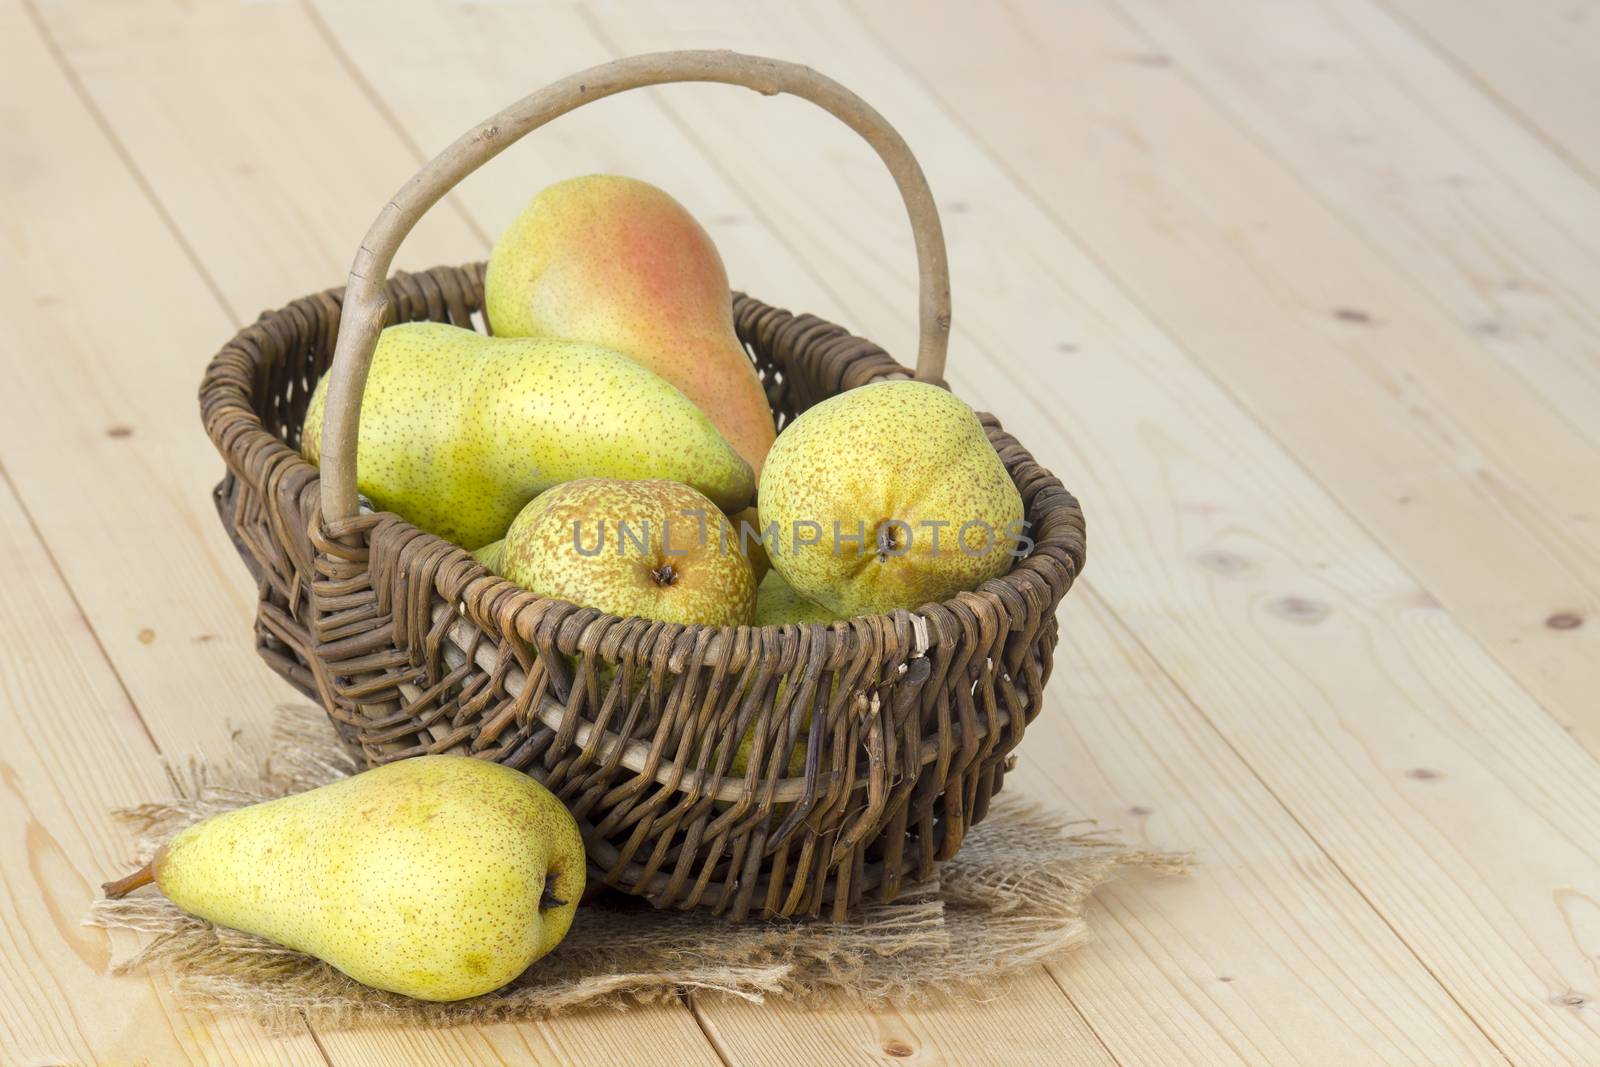 Juicy fresh pears in a basket wooden background